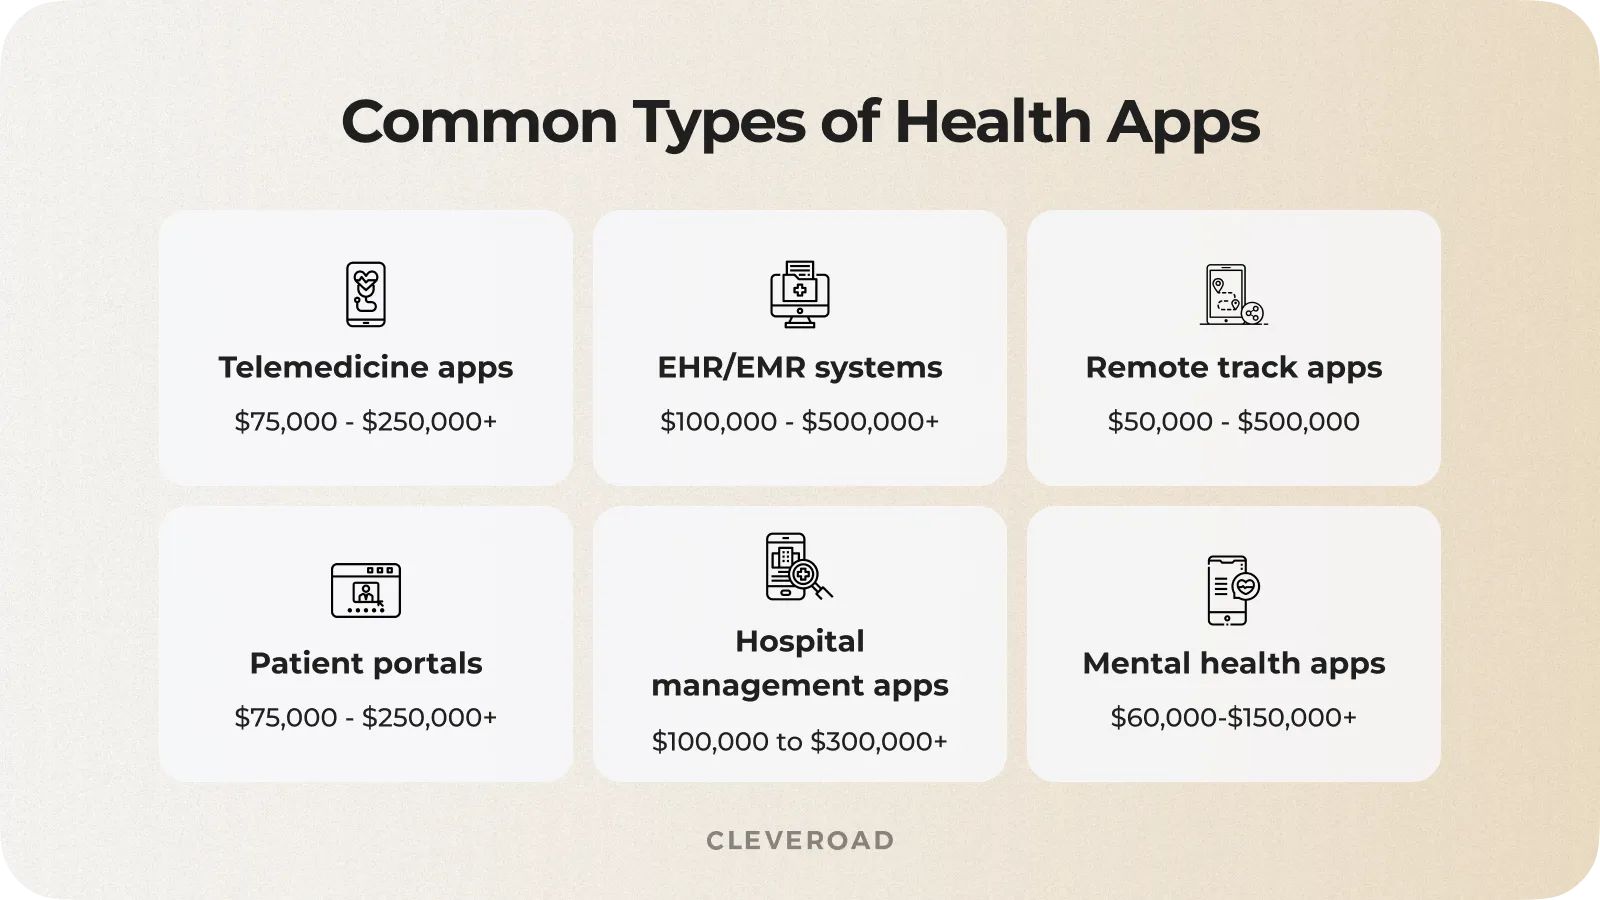 The common types of healthcare software